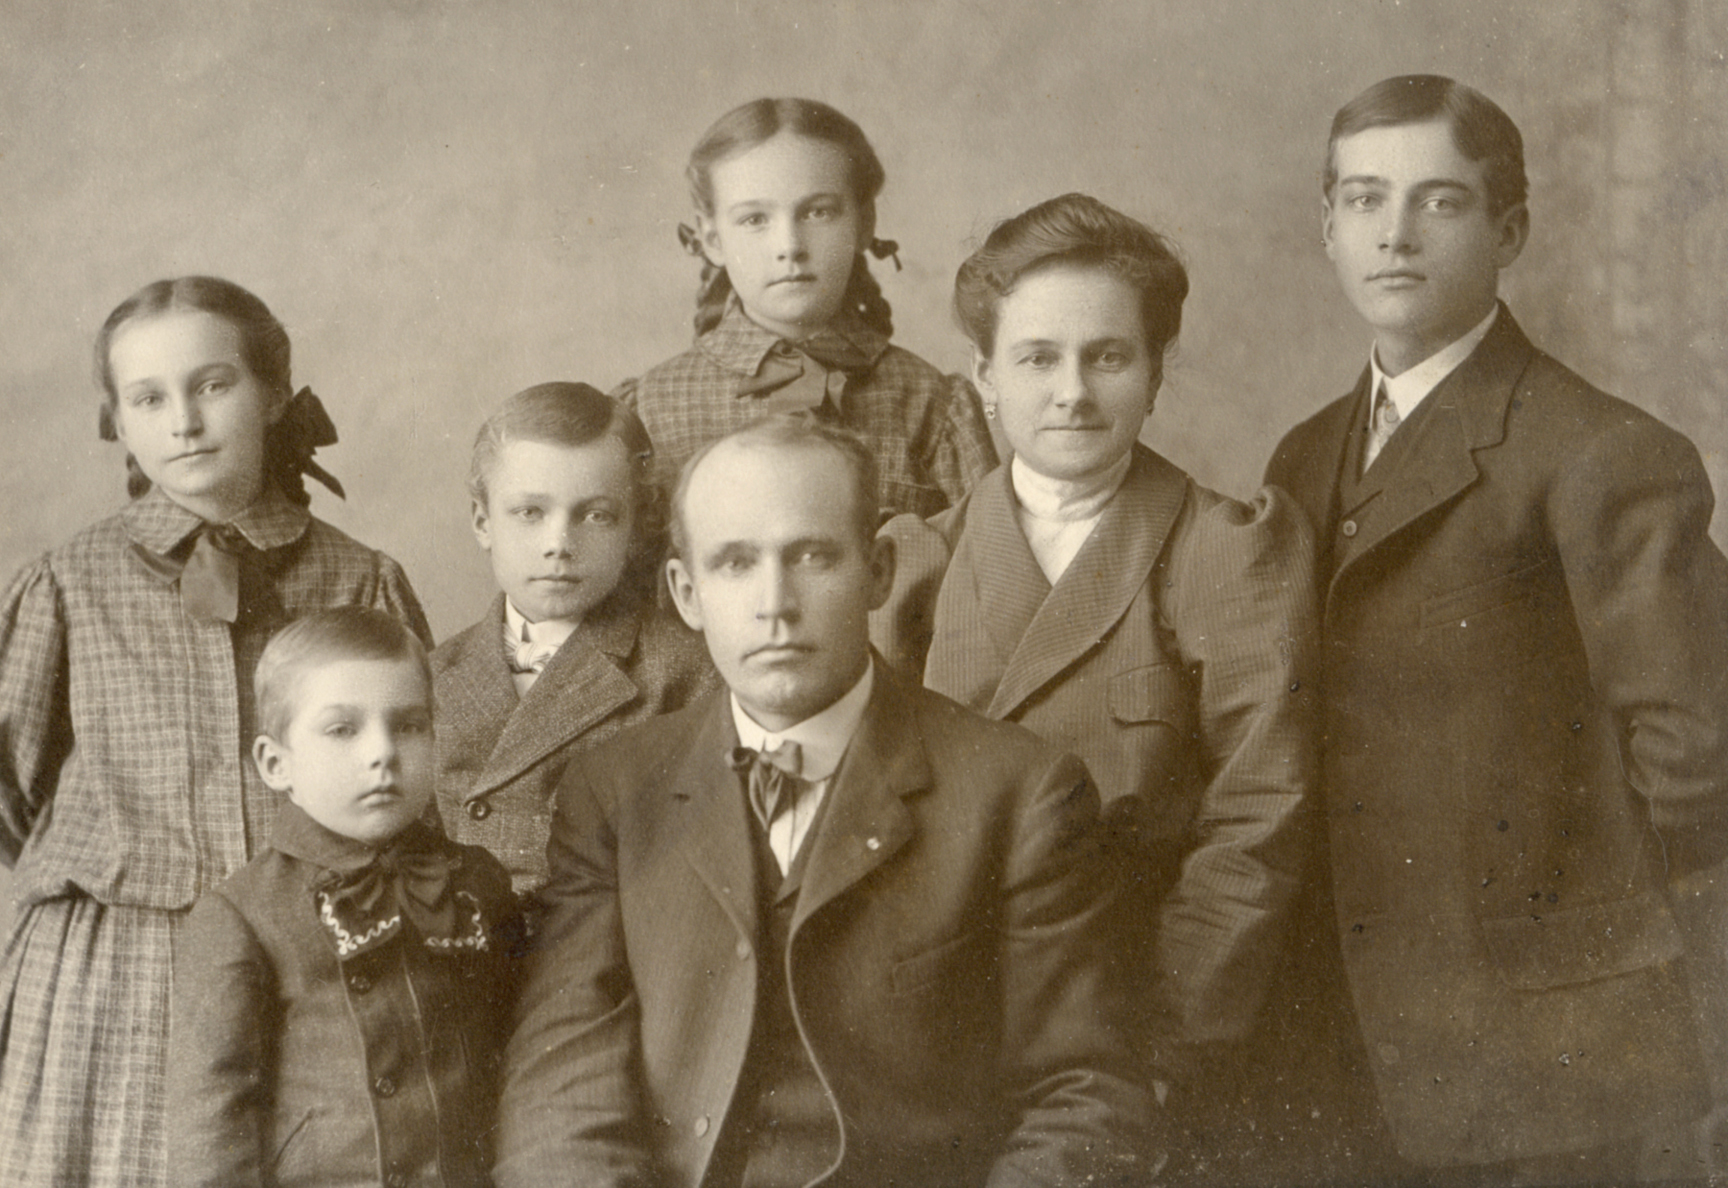 Justin Byron Gowen (William’s brother) his wife Antoinette Marie Wasmer, and their children Octavia, Ralph, Justin, Daphine, William. About 1909.